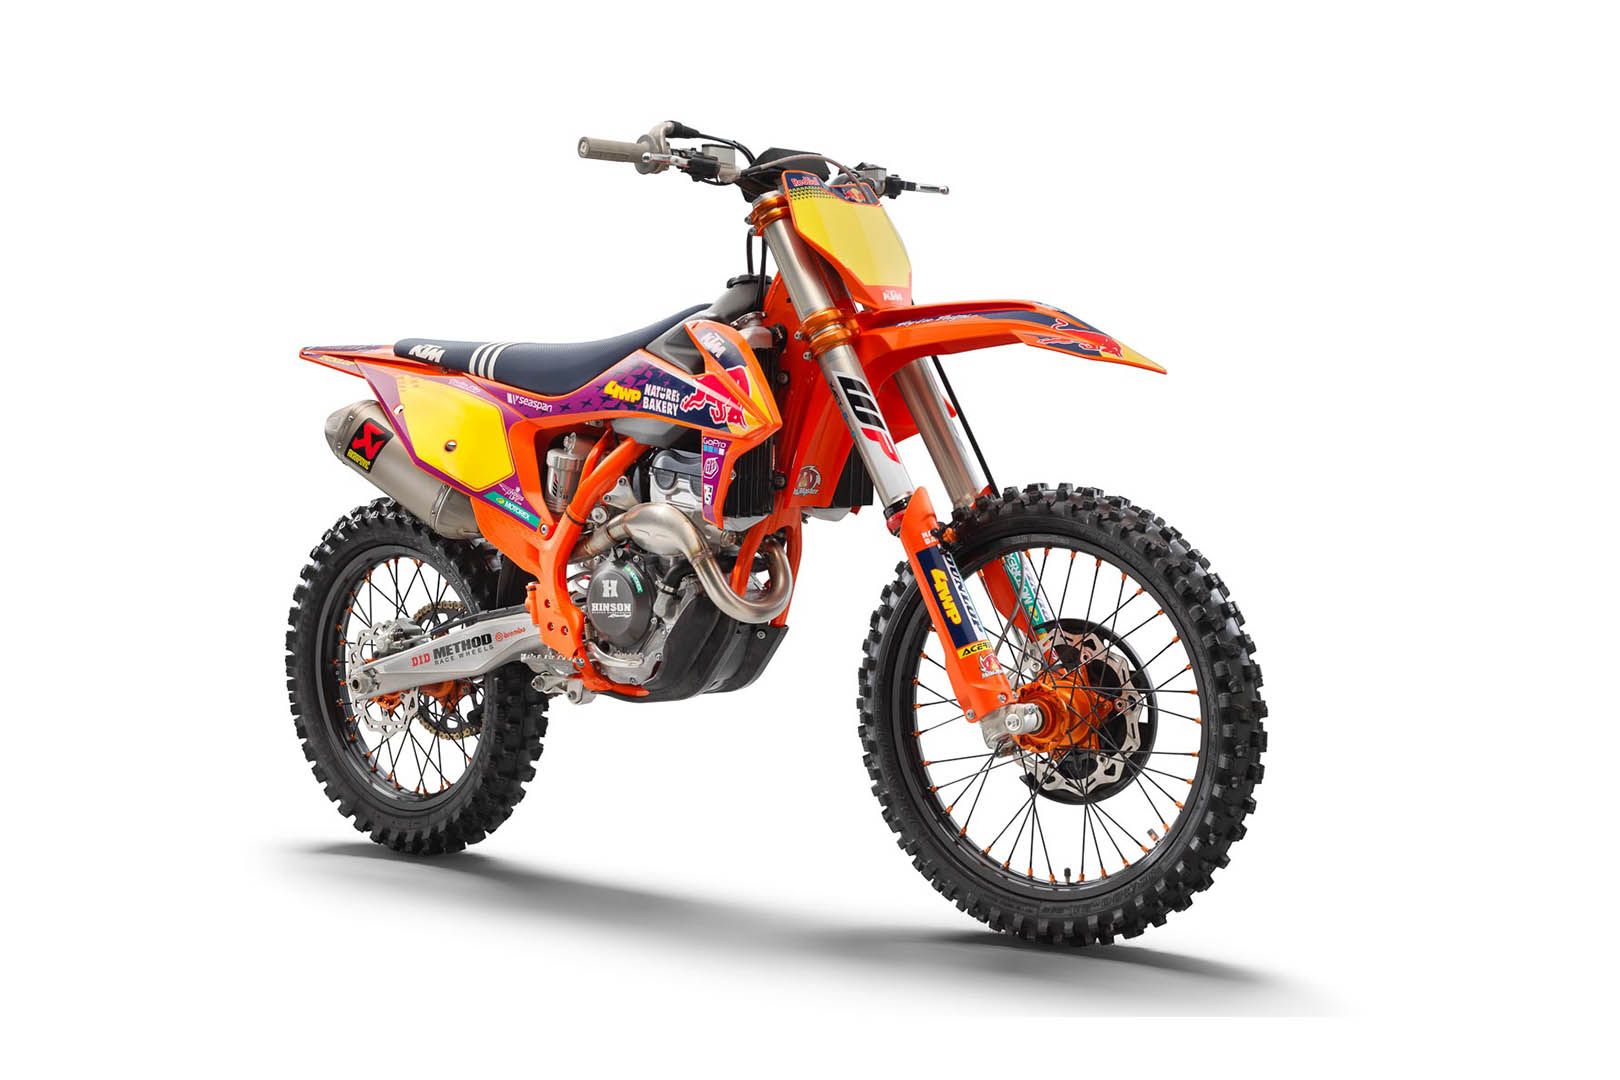 2021-KTM-250-SX-F-Troy-Lee-Designs-special-edition-motocross-supercross-motorcycle-featured